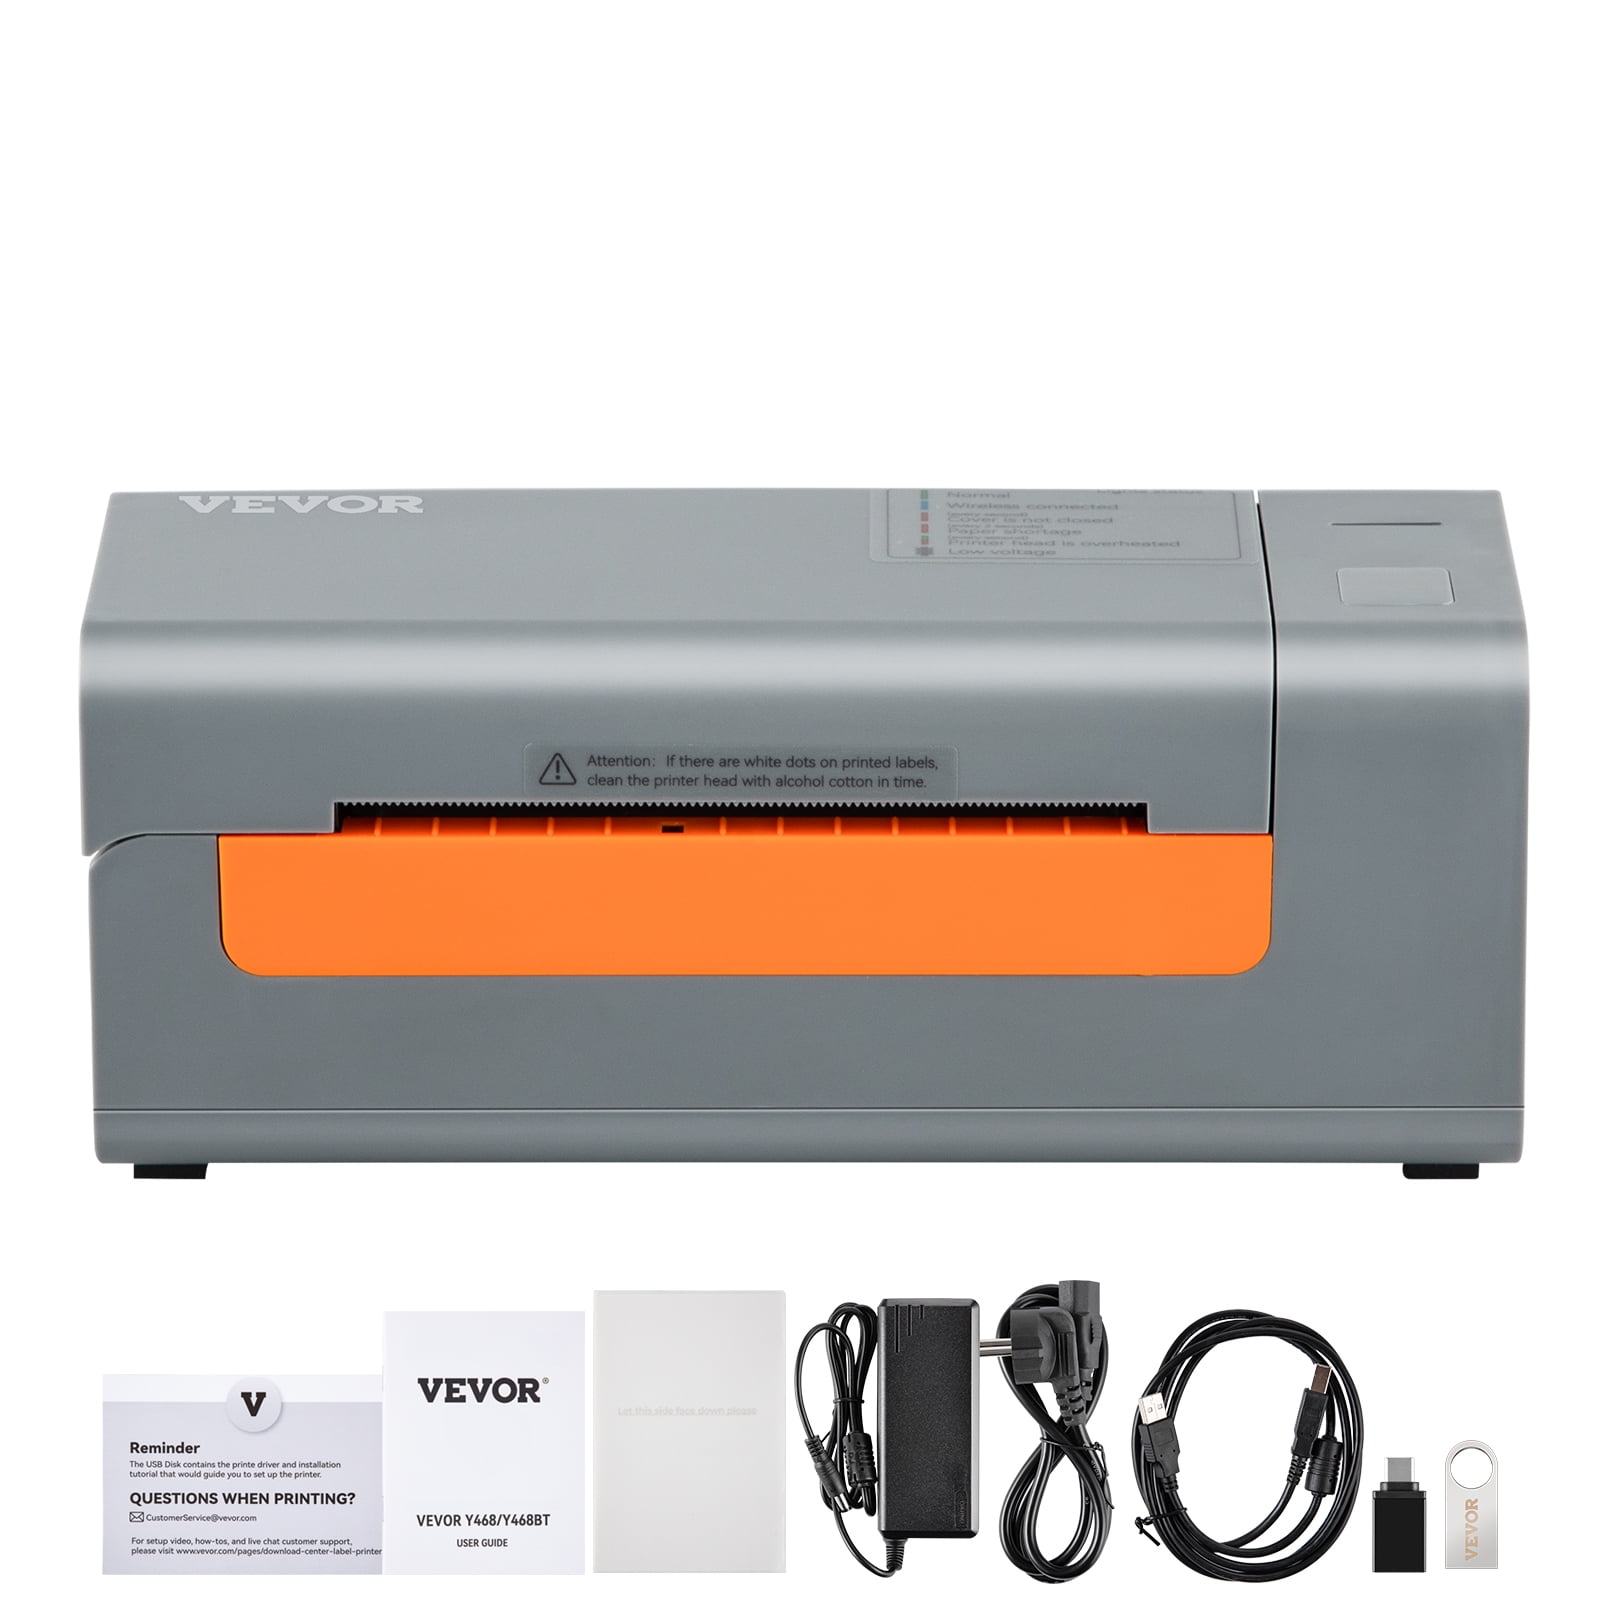 VEVOR Thermal Label Printer, 203DPI 60pcs/min for 4x6 Mailing Packages, USB  Connection & Automatic Label Recognition, Support Windows/MacOS/Linux